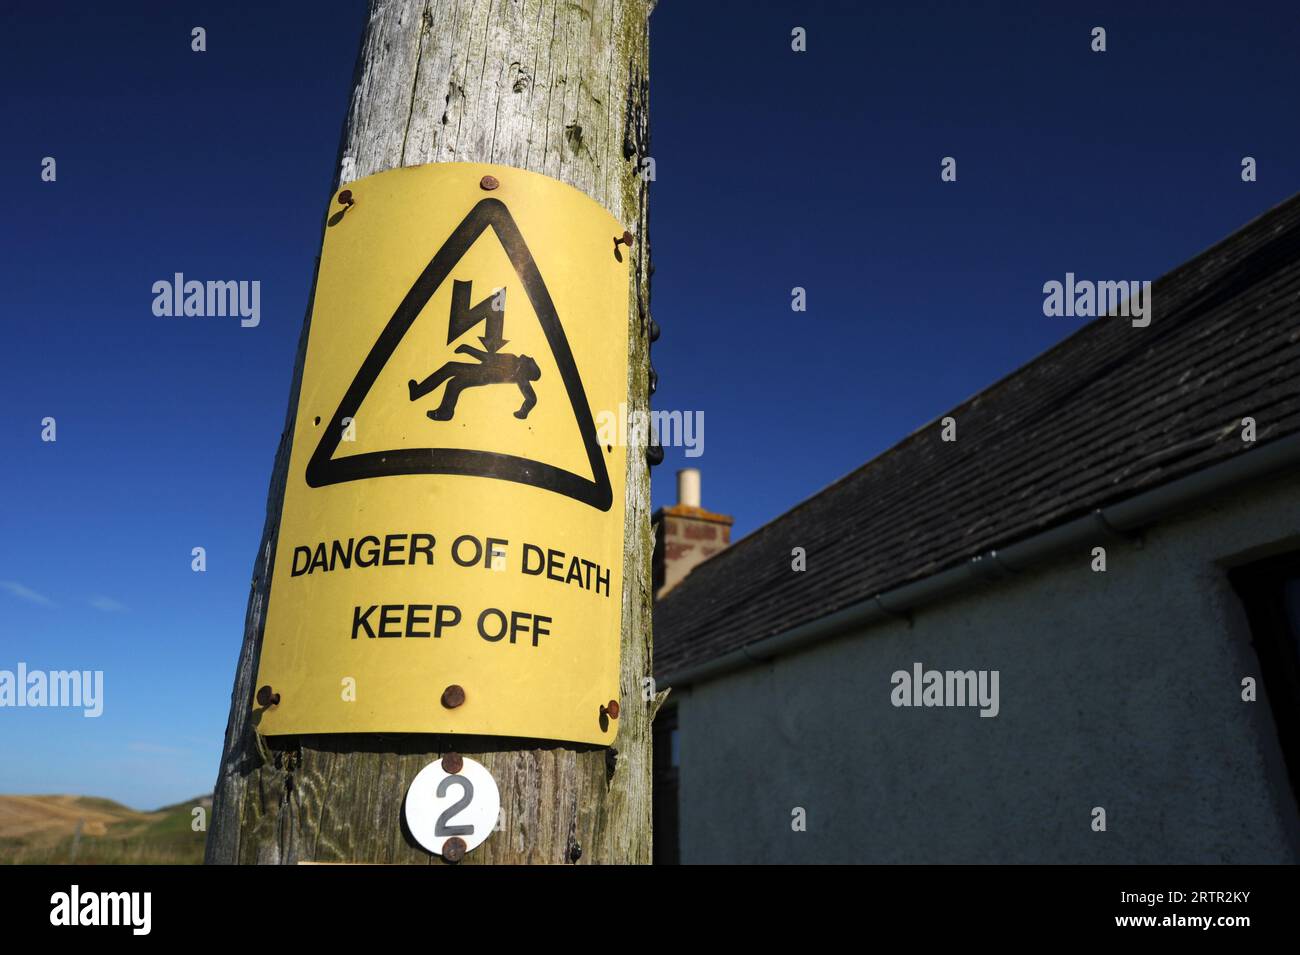 WOODEN ELECTRICITY POST WITH 'DANGER OF DEATH' SIGN RE DANGERS WARNING SIGNS ETC UK Stock Photo